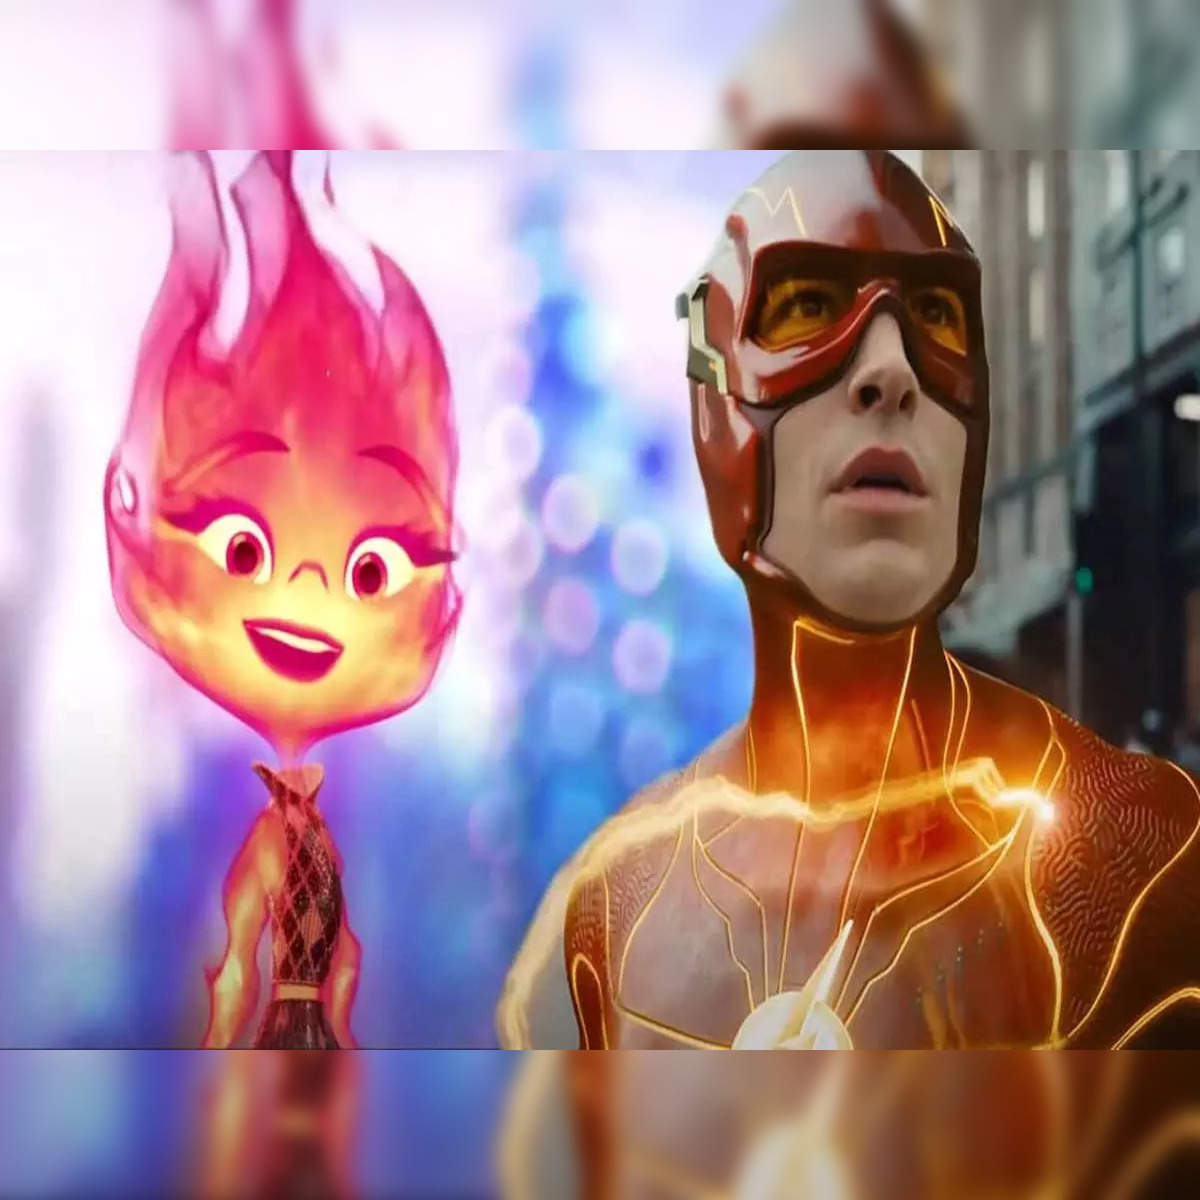 The Flash Box Office: 'The Flash' bombs at box-office, Warner Bros. may  reboot franchise - The Economic Times